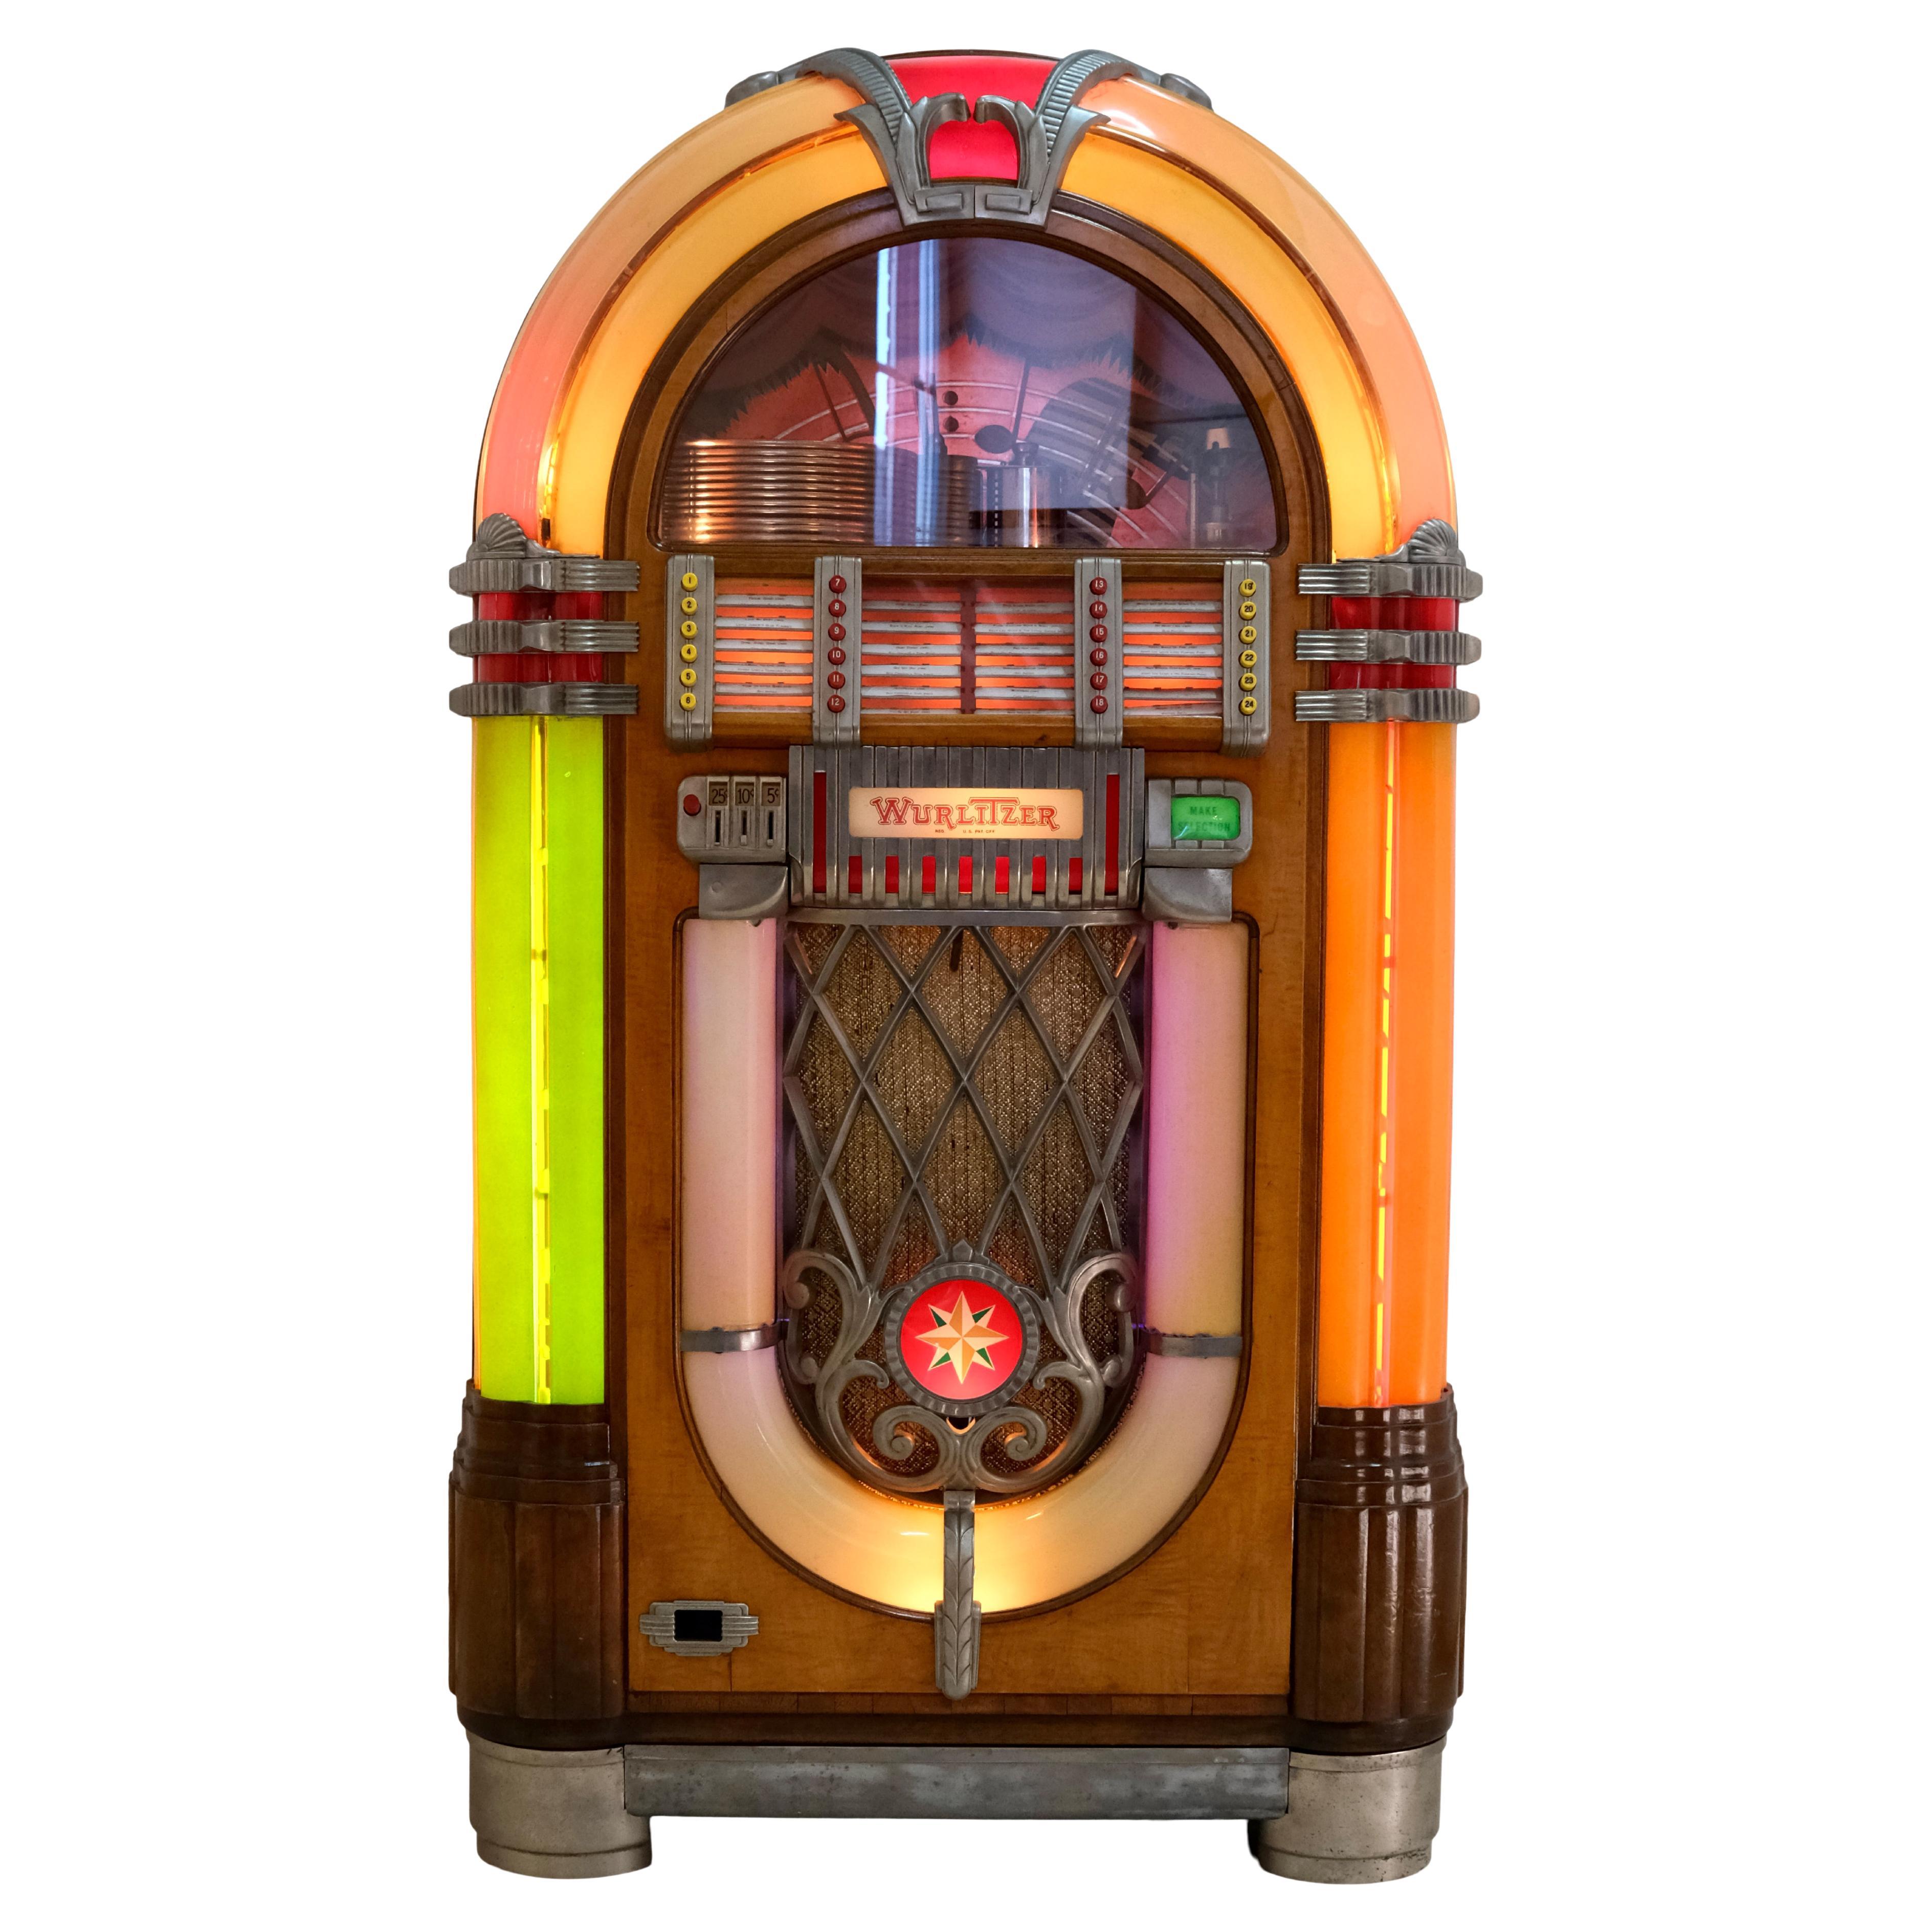 Wurlitzer Jukebox from 1943 Multi Selector Phonograph from the United States